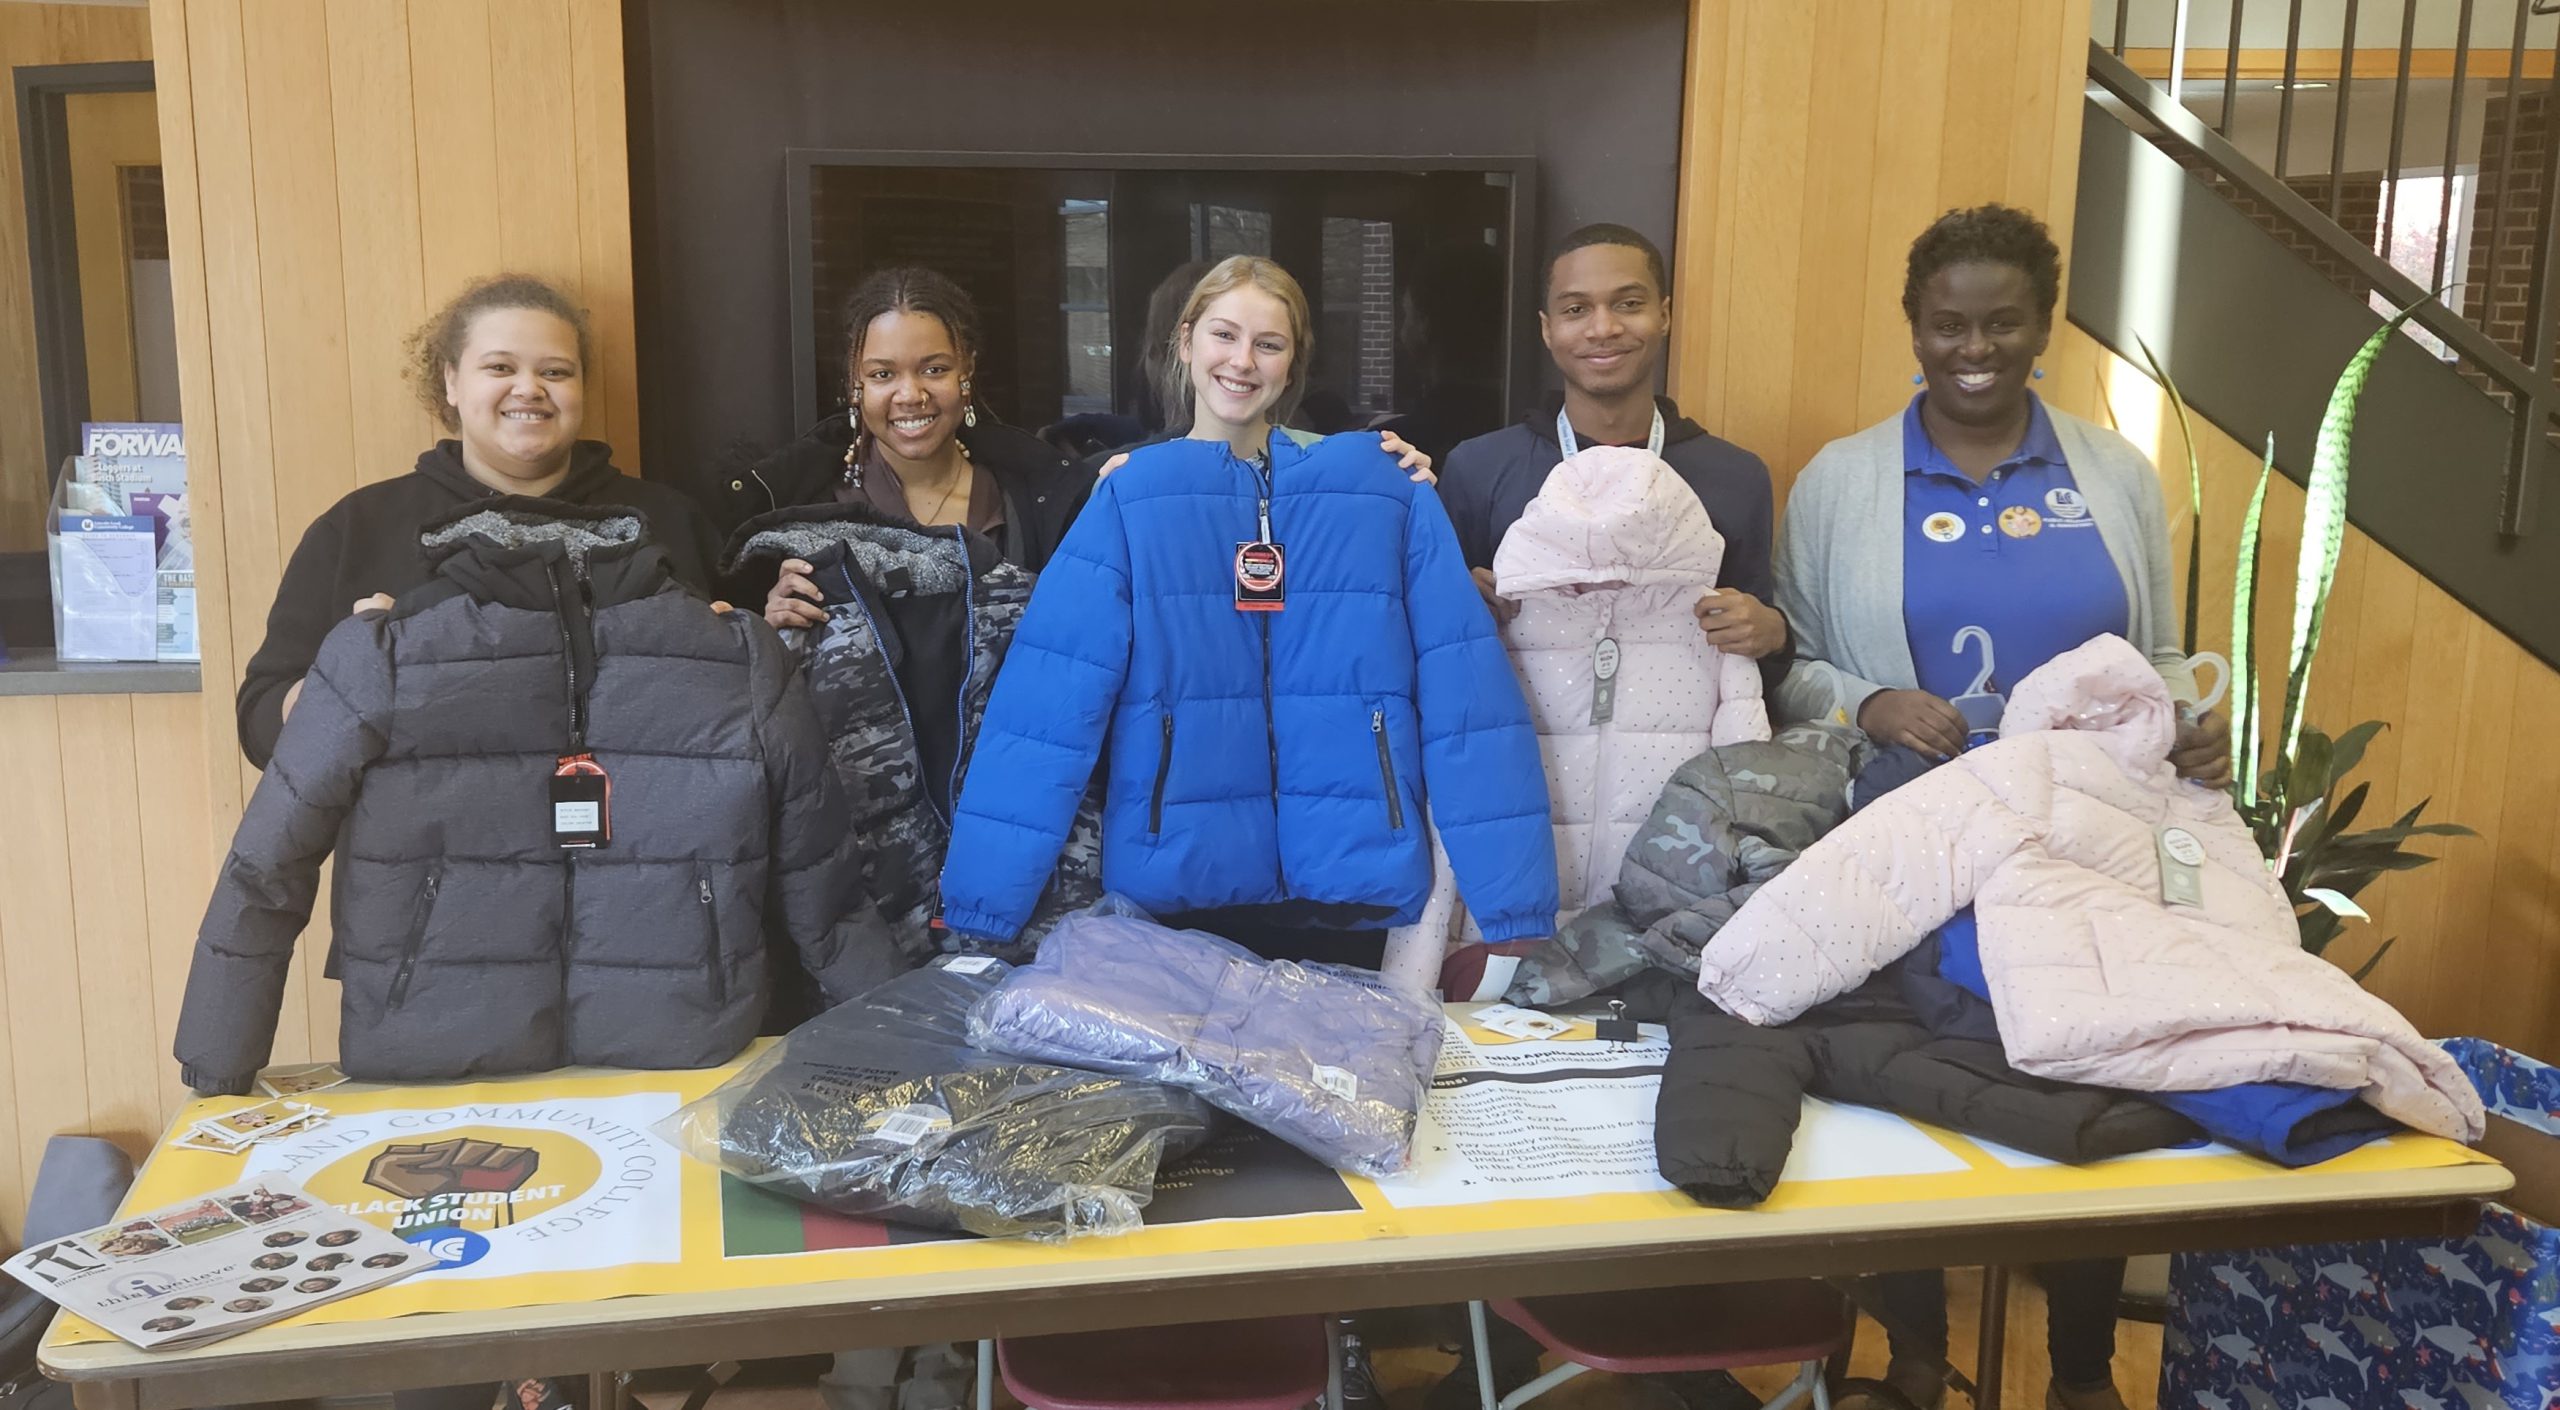 Members of BSU and PTK collecting coats at table in A. Lincoln Commons